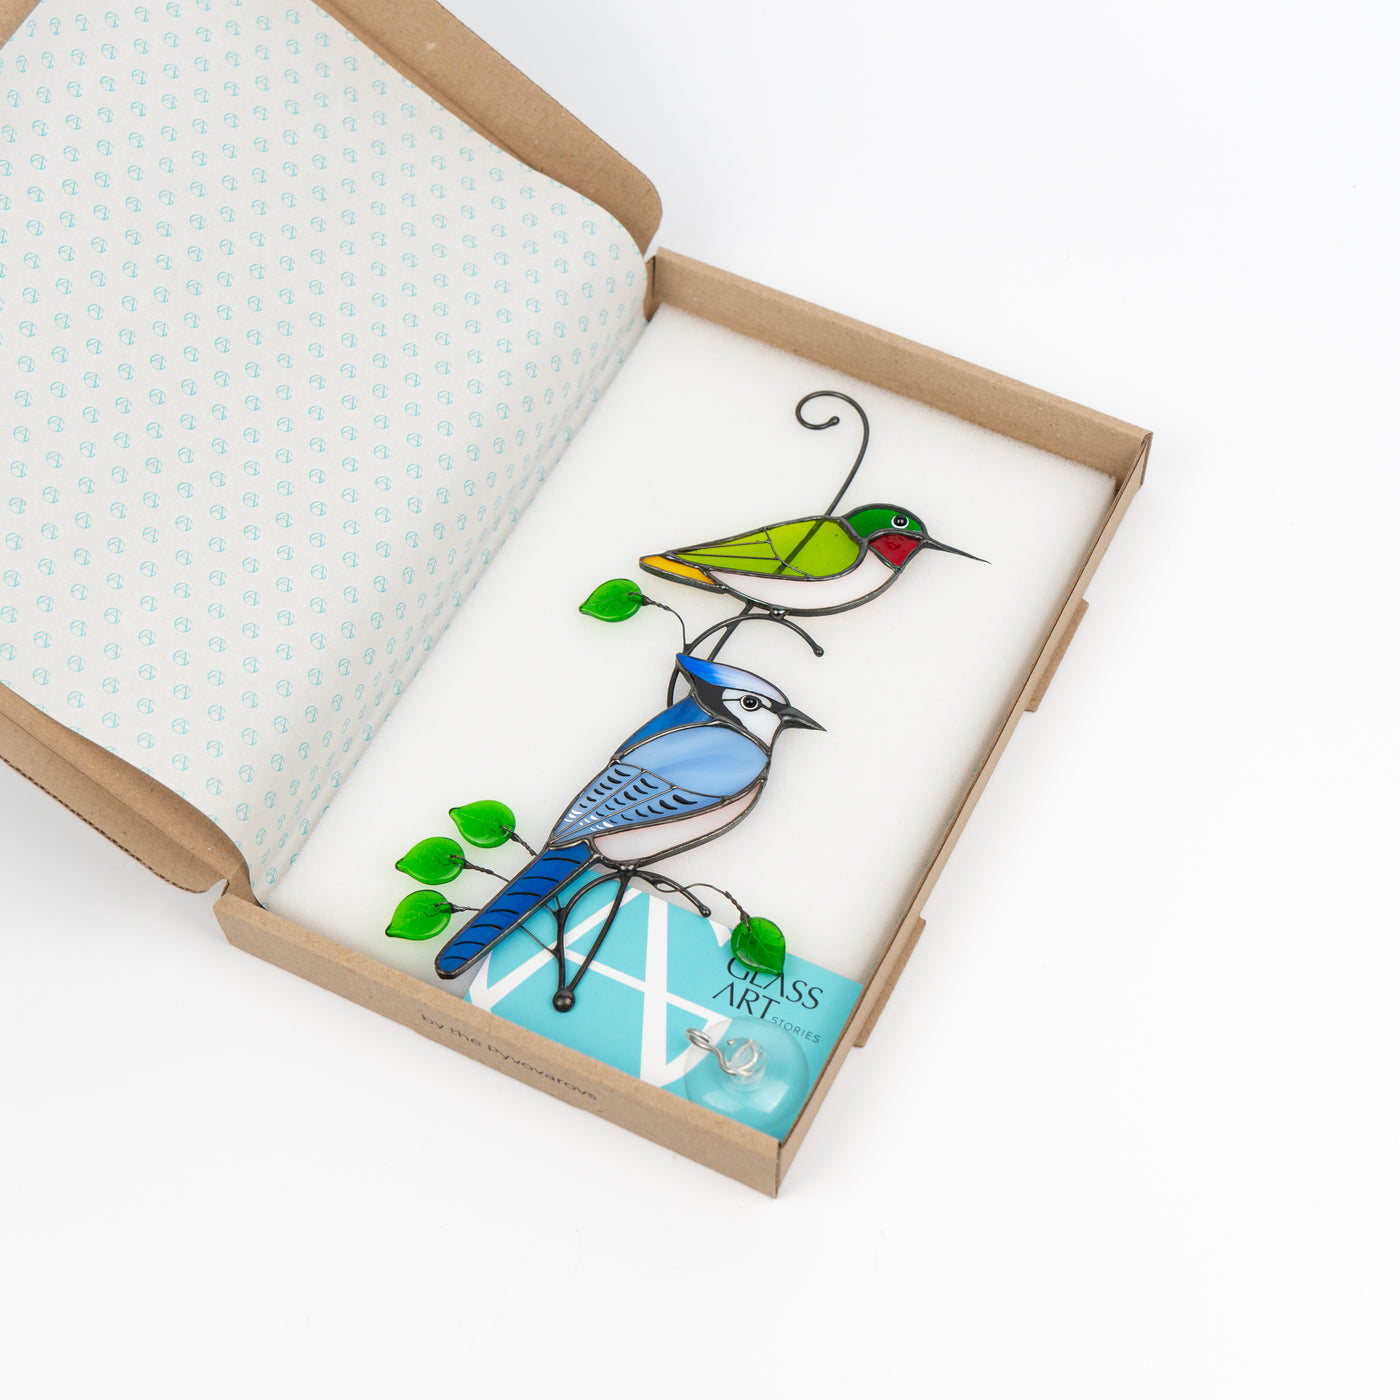 Stained glass hummingbird and blue jay suncatcher in a brand box